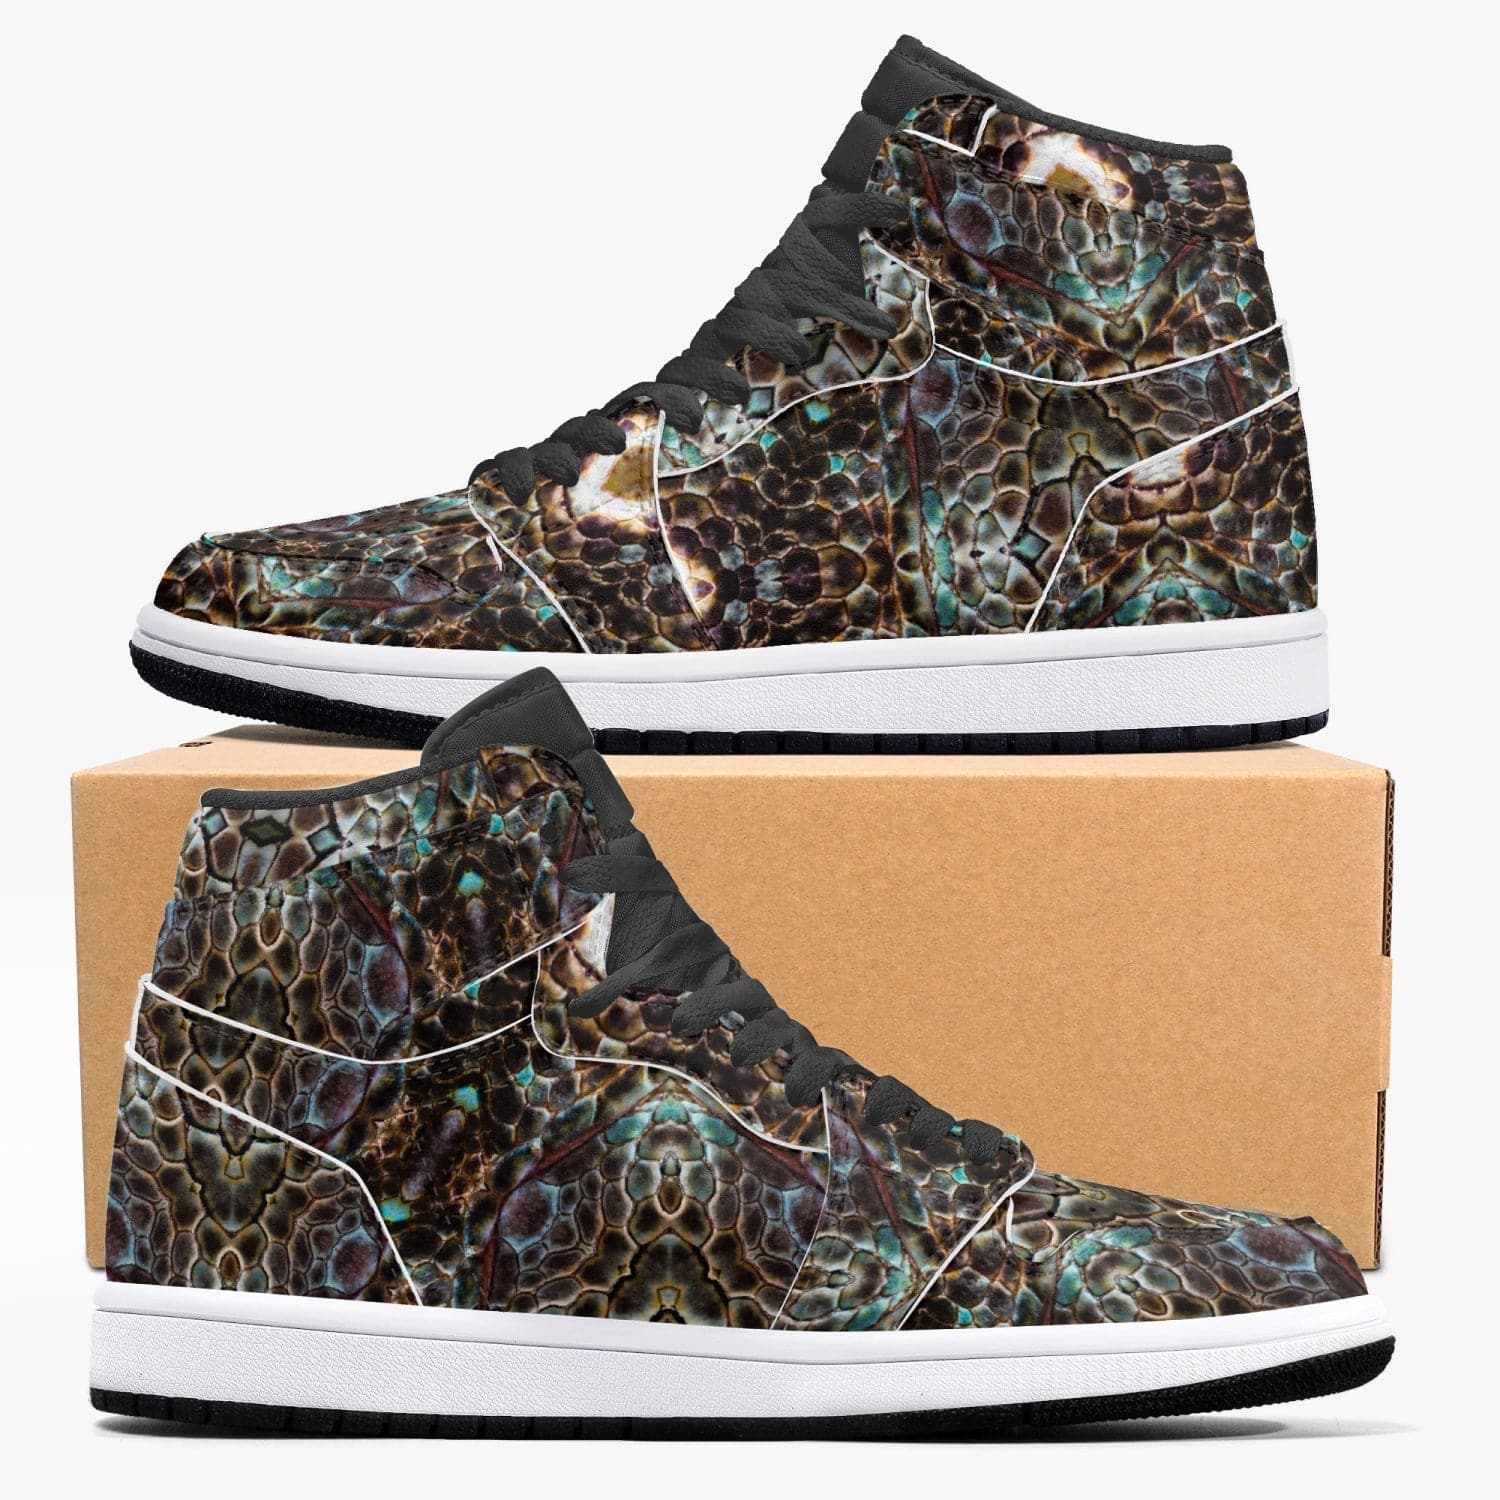 Rattle Snake Kaleidoscope  New Black High-Top Leather Sneakers for Men, by Sensus Studio Design